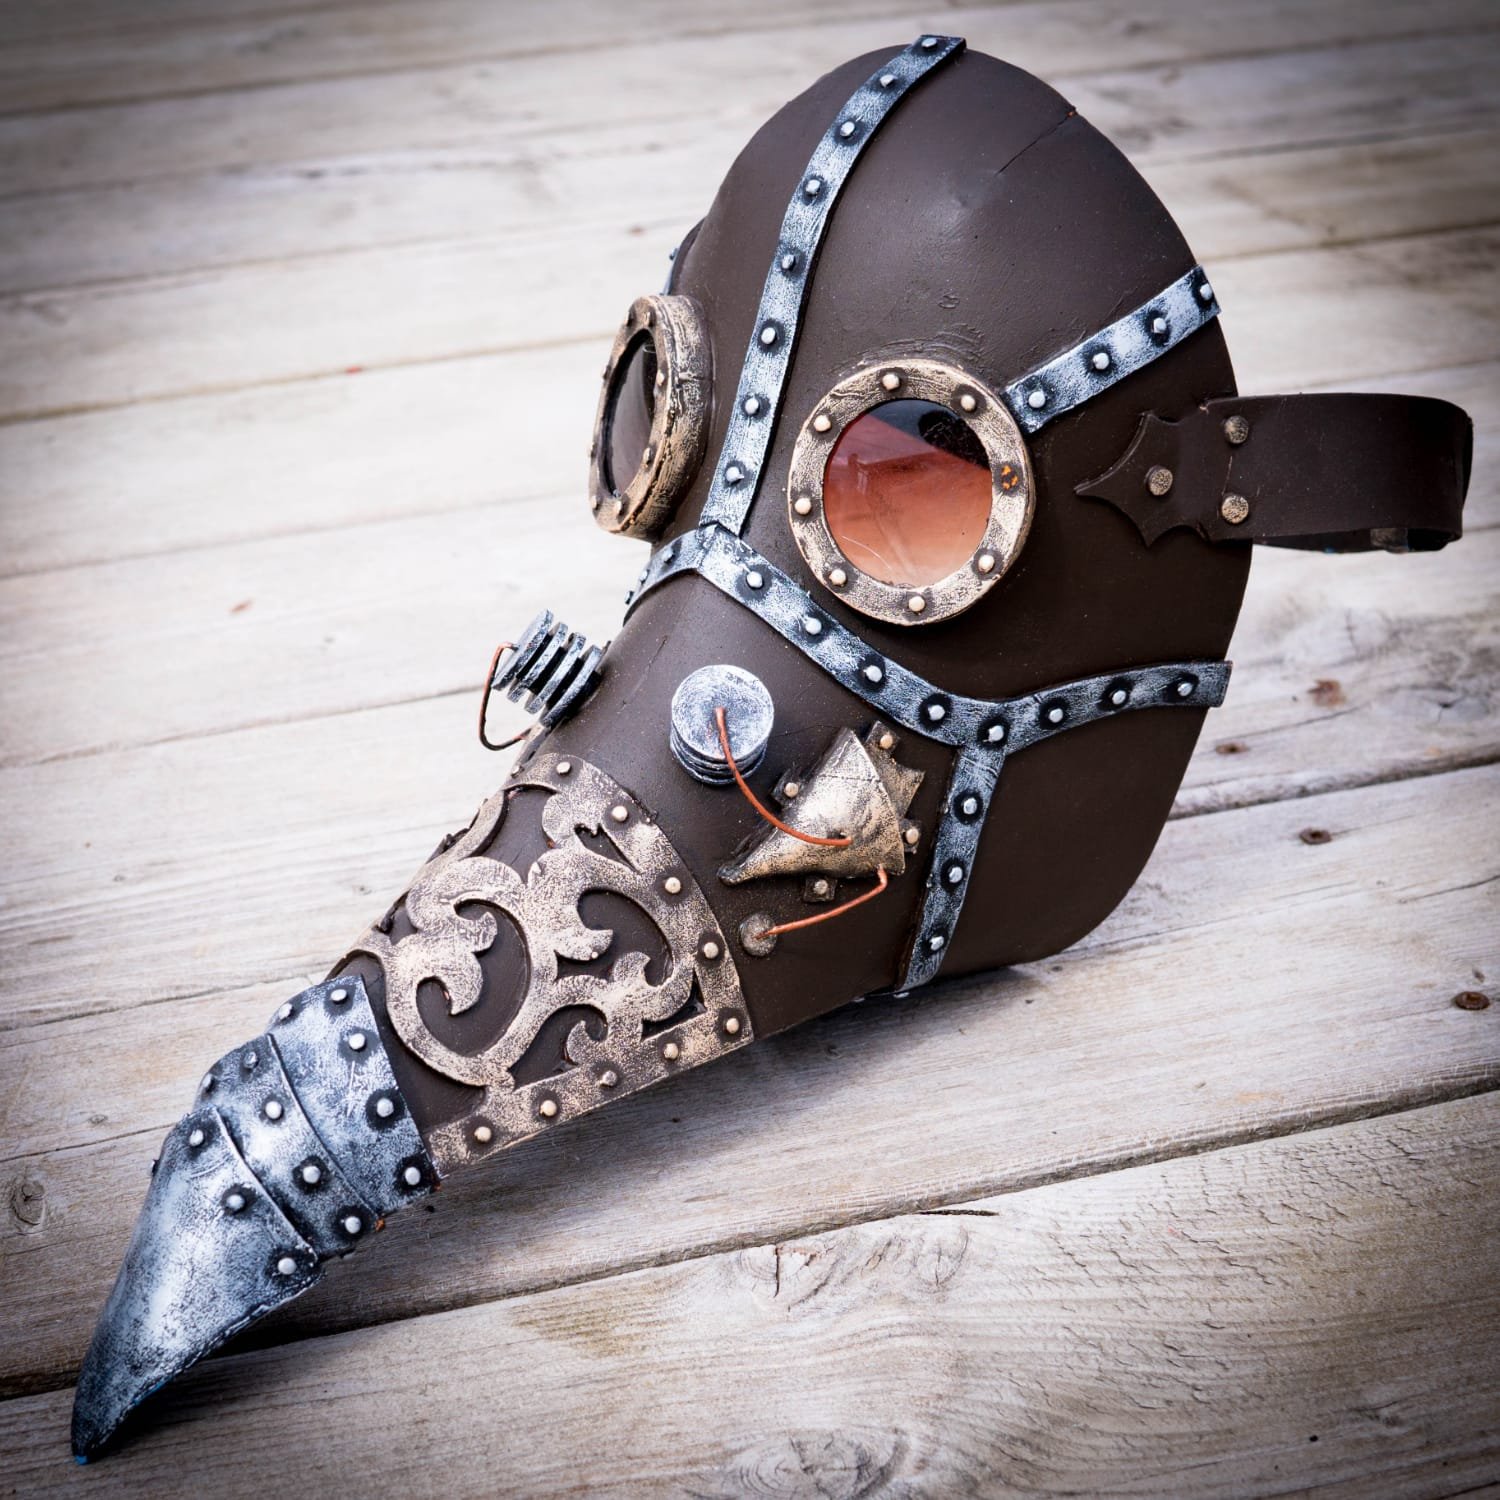 10 Amazing Steampunk Costume Ideas and accessories made from foam